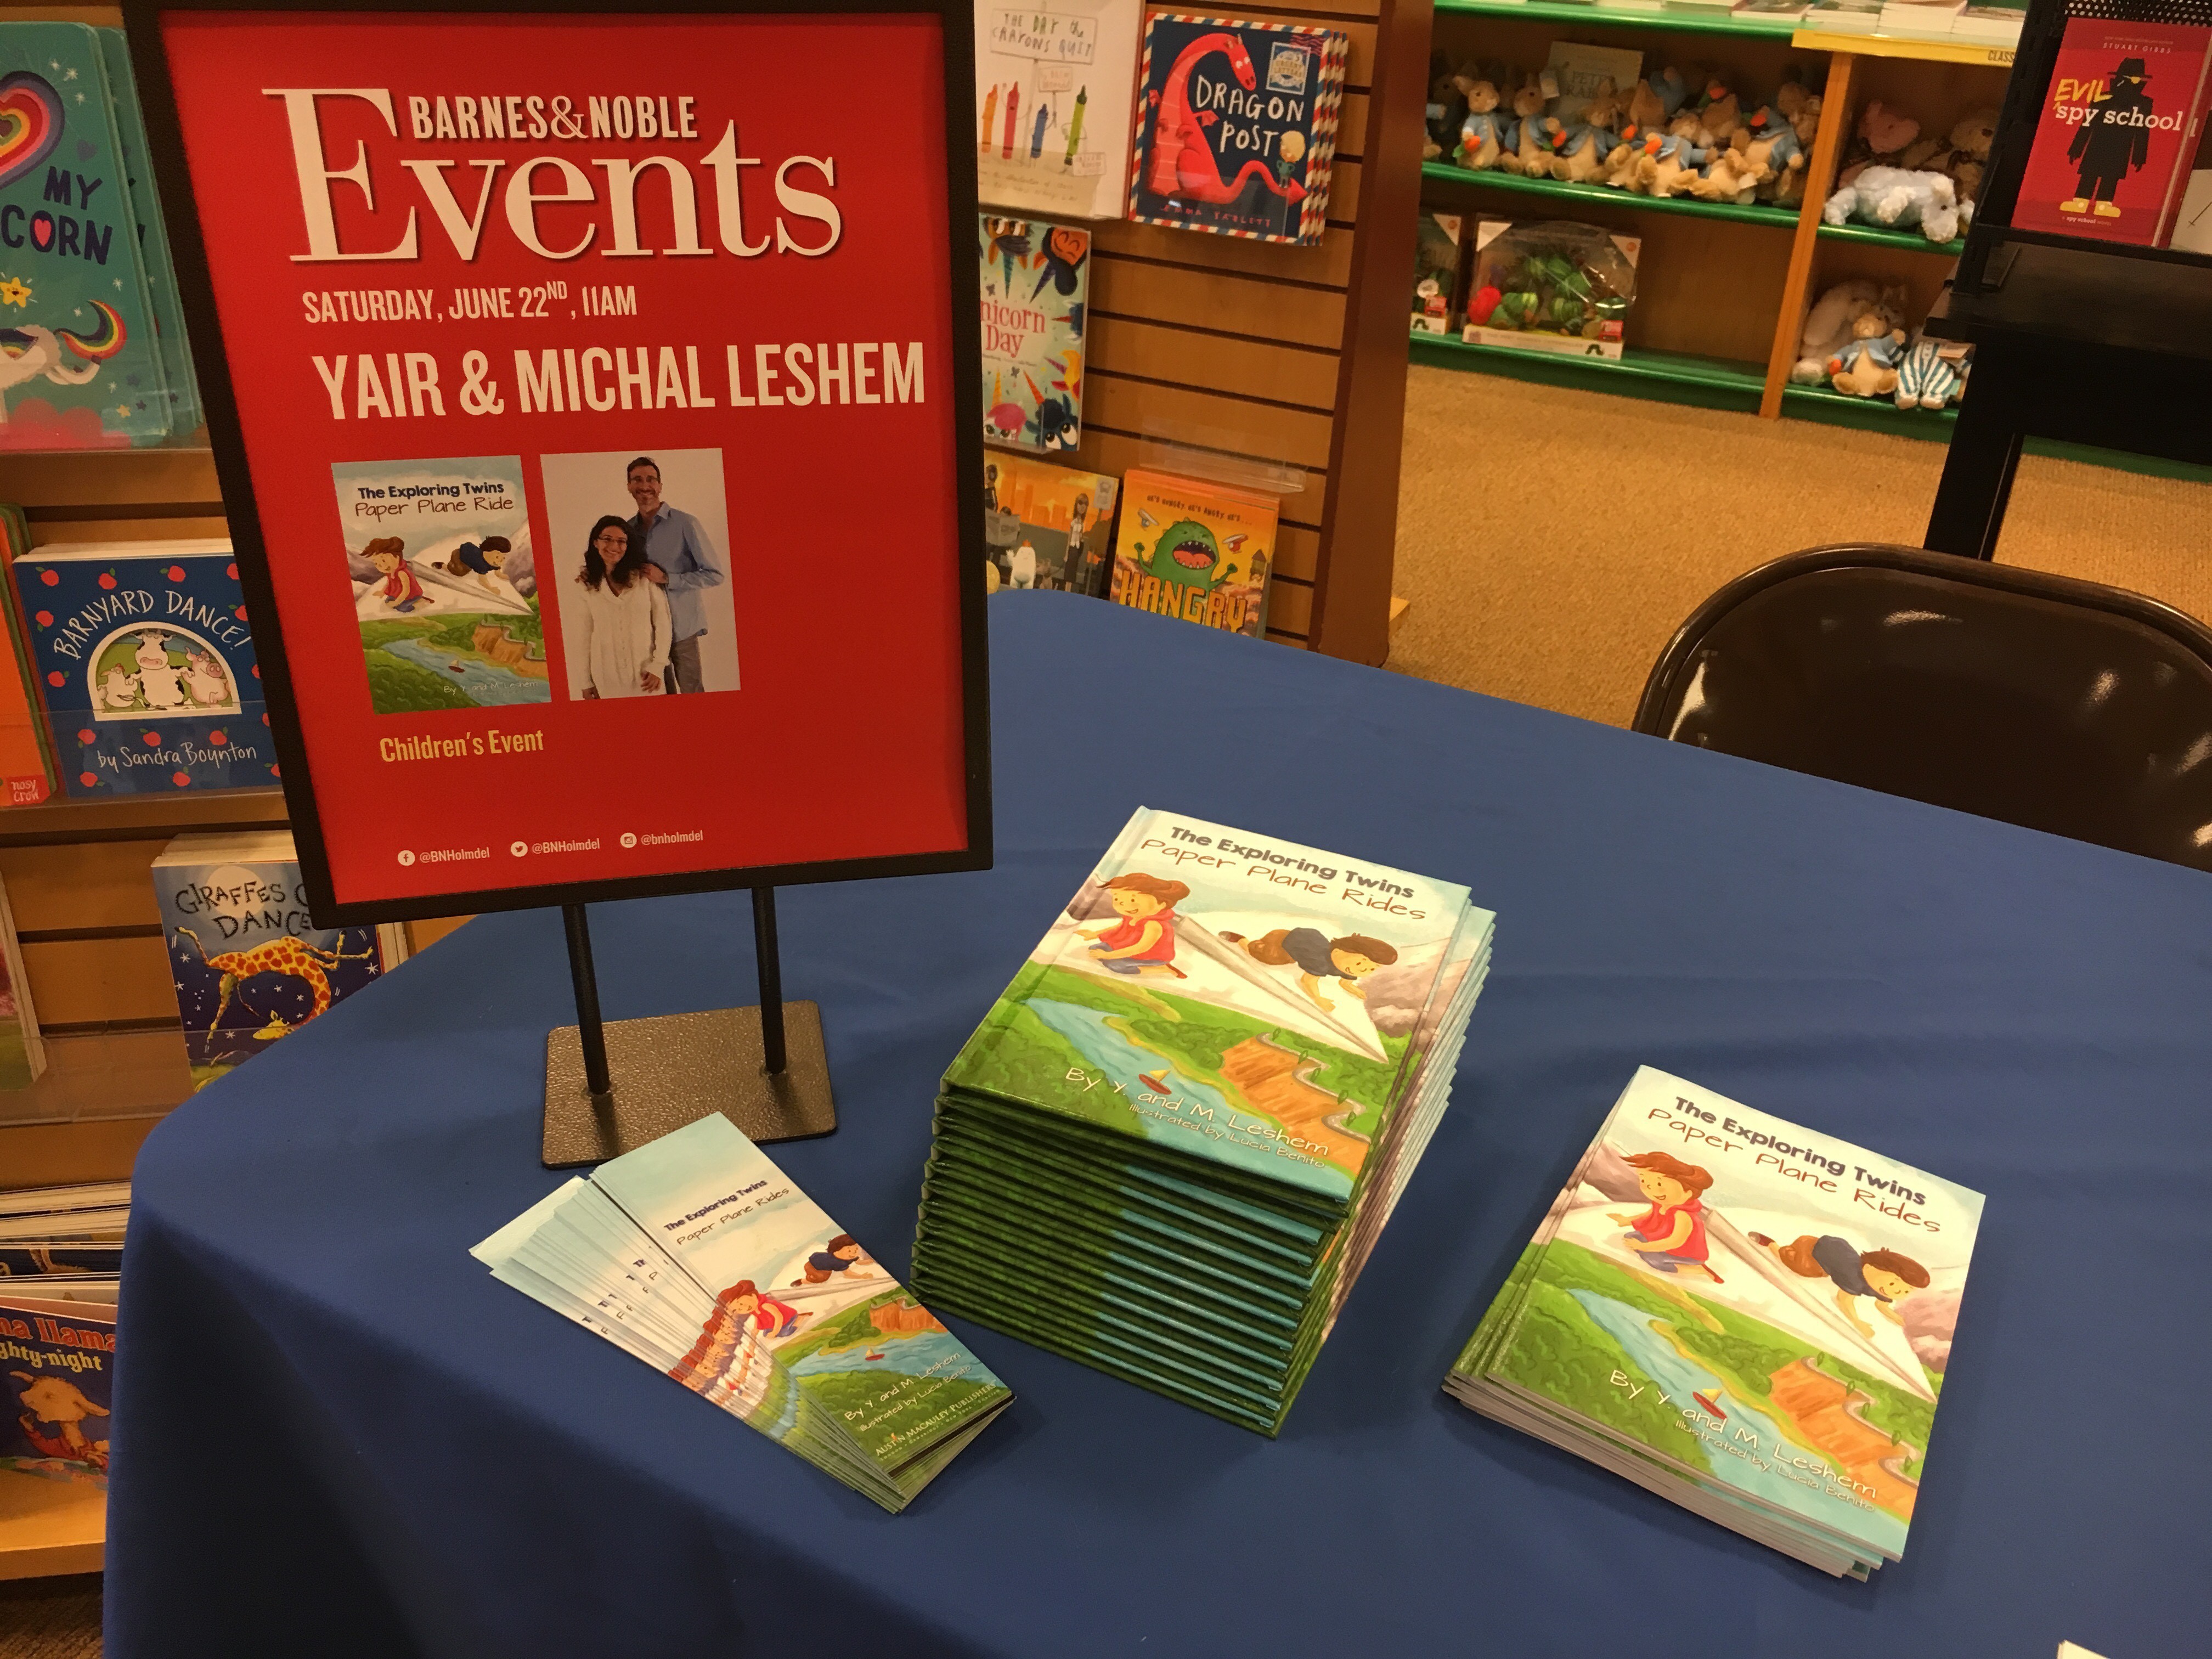 Barnes and Nobles Invited the Spectacular Authors Y. and M. Leshem for a Book Signing Event